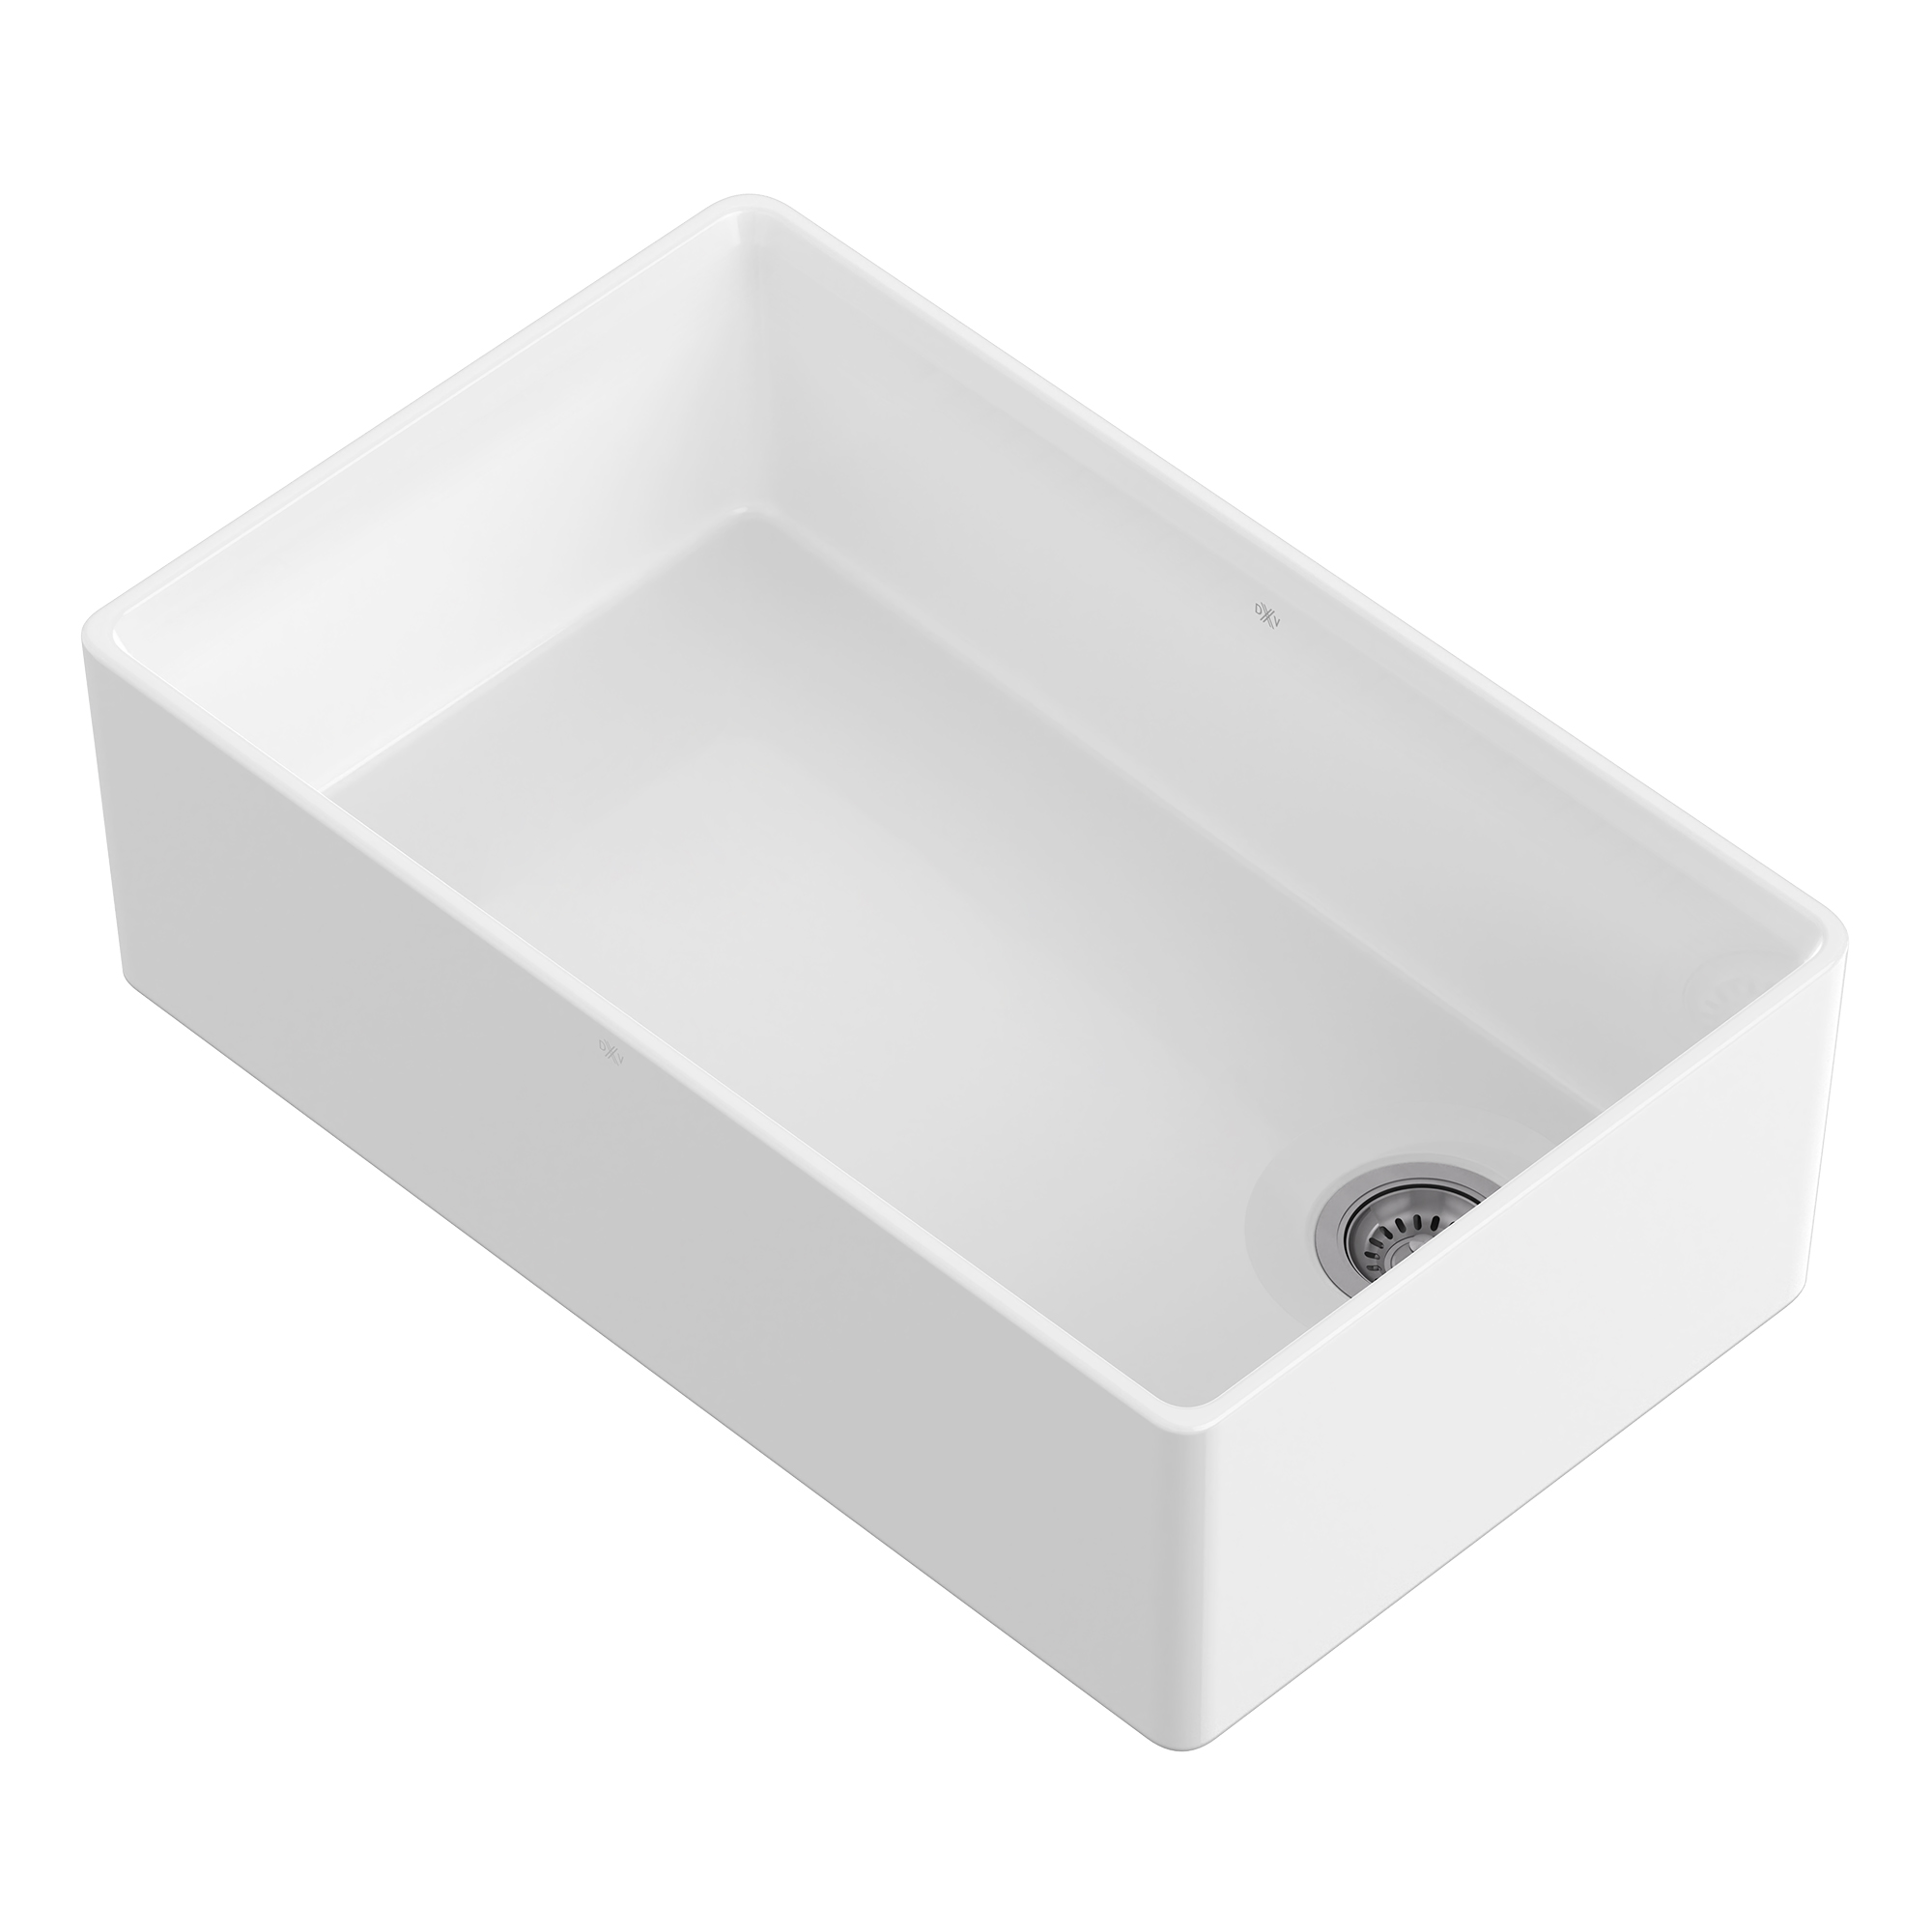 Etre 33 in. Apron Kitchen Sink with Offset Drain